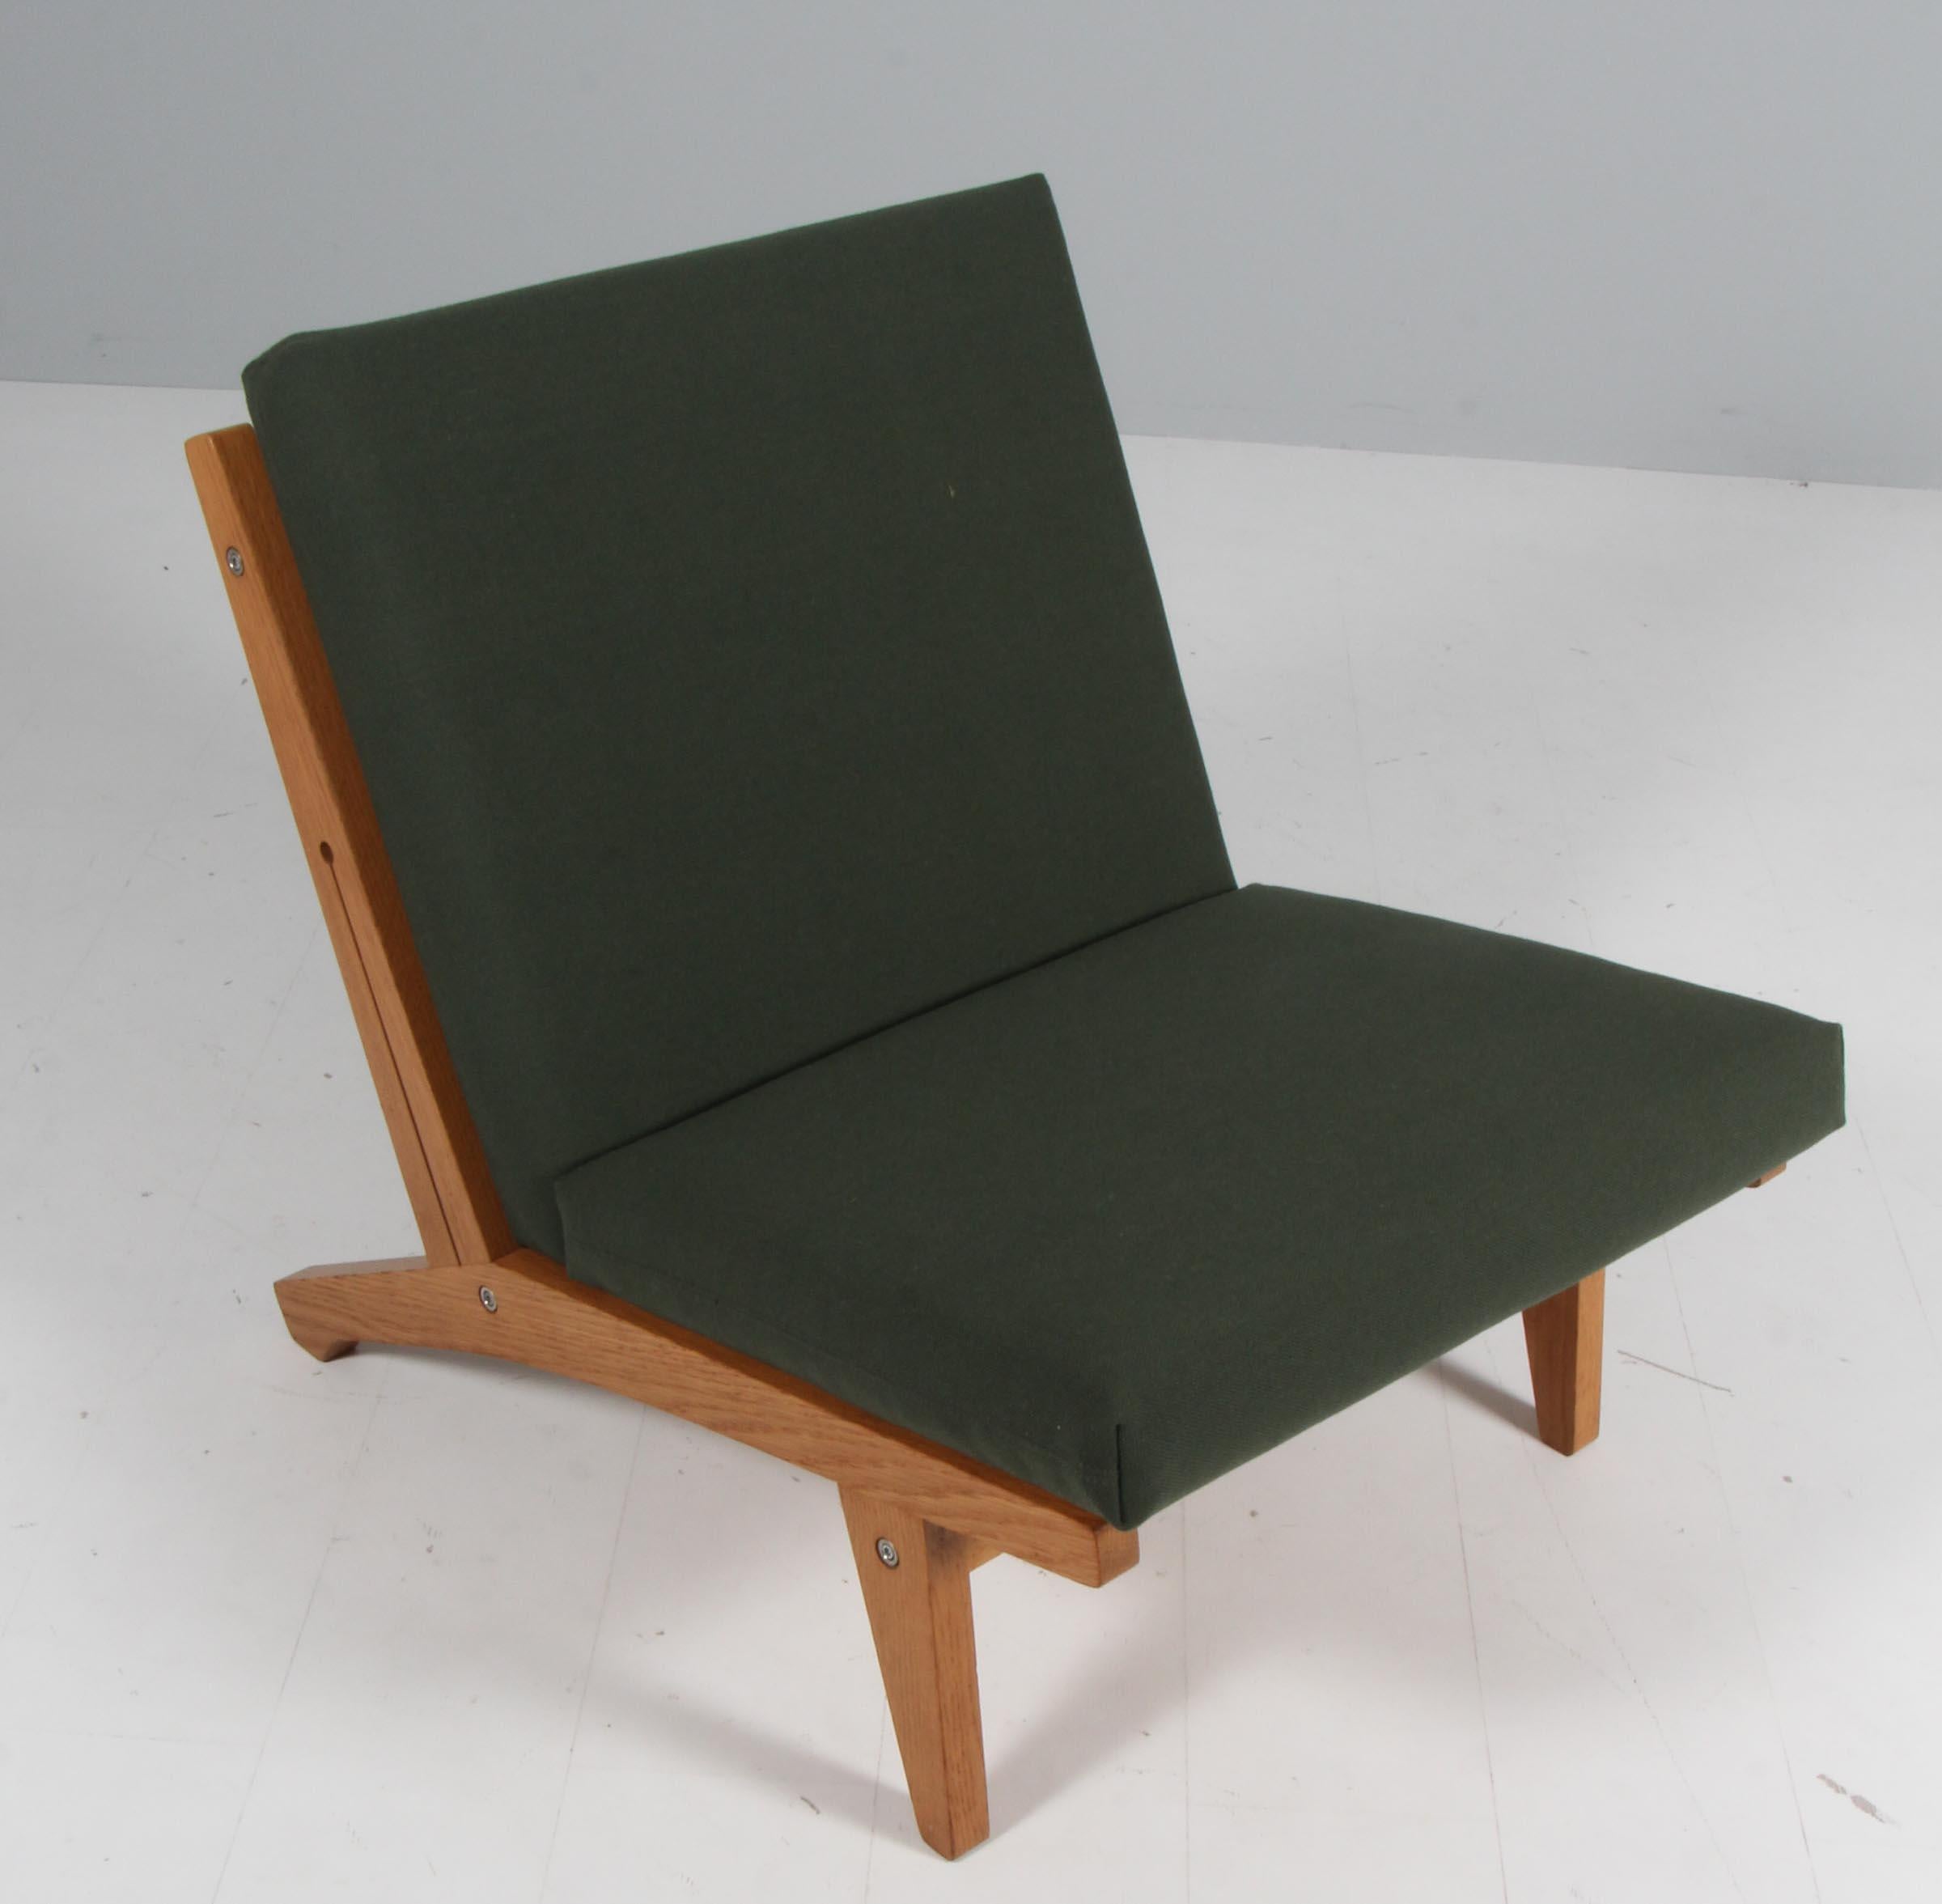 Hans J. Wegner lounge chair with loose cushions new upholstered with green Hallingdal from Kvadrat.

Frame of solid oak

Model GE-370, made by GETAMA.